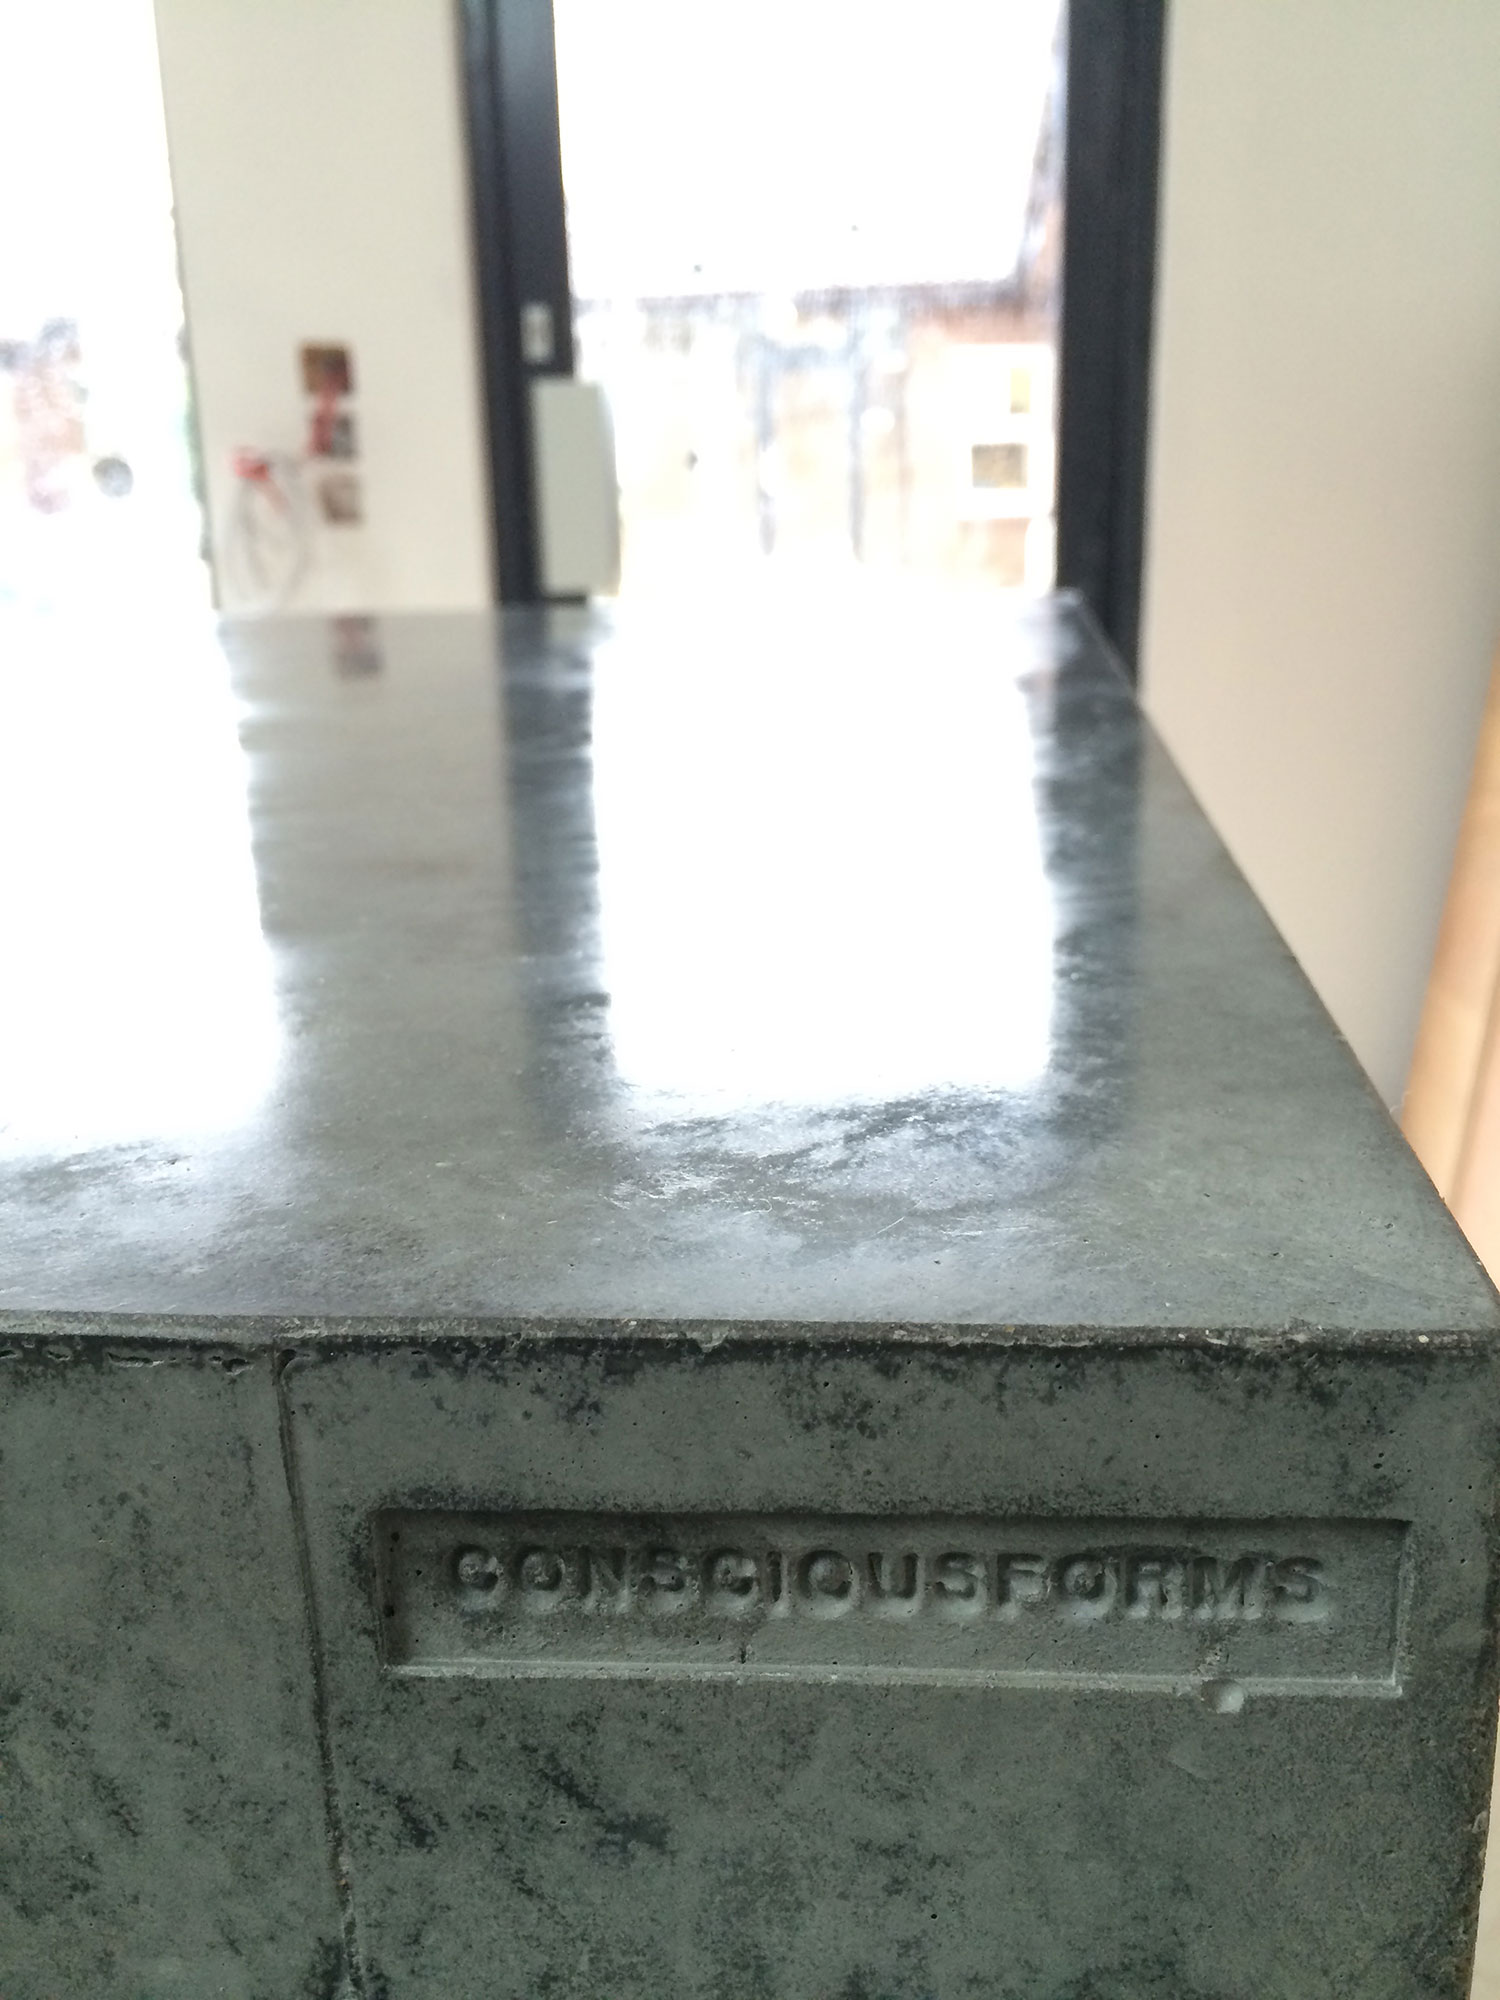 Conscious Forms - st raphaels hospice cheam orangery cafe polished concrete service counter standard grey cementitious finish before exposed aggregate finish consciousforms embossed logo